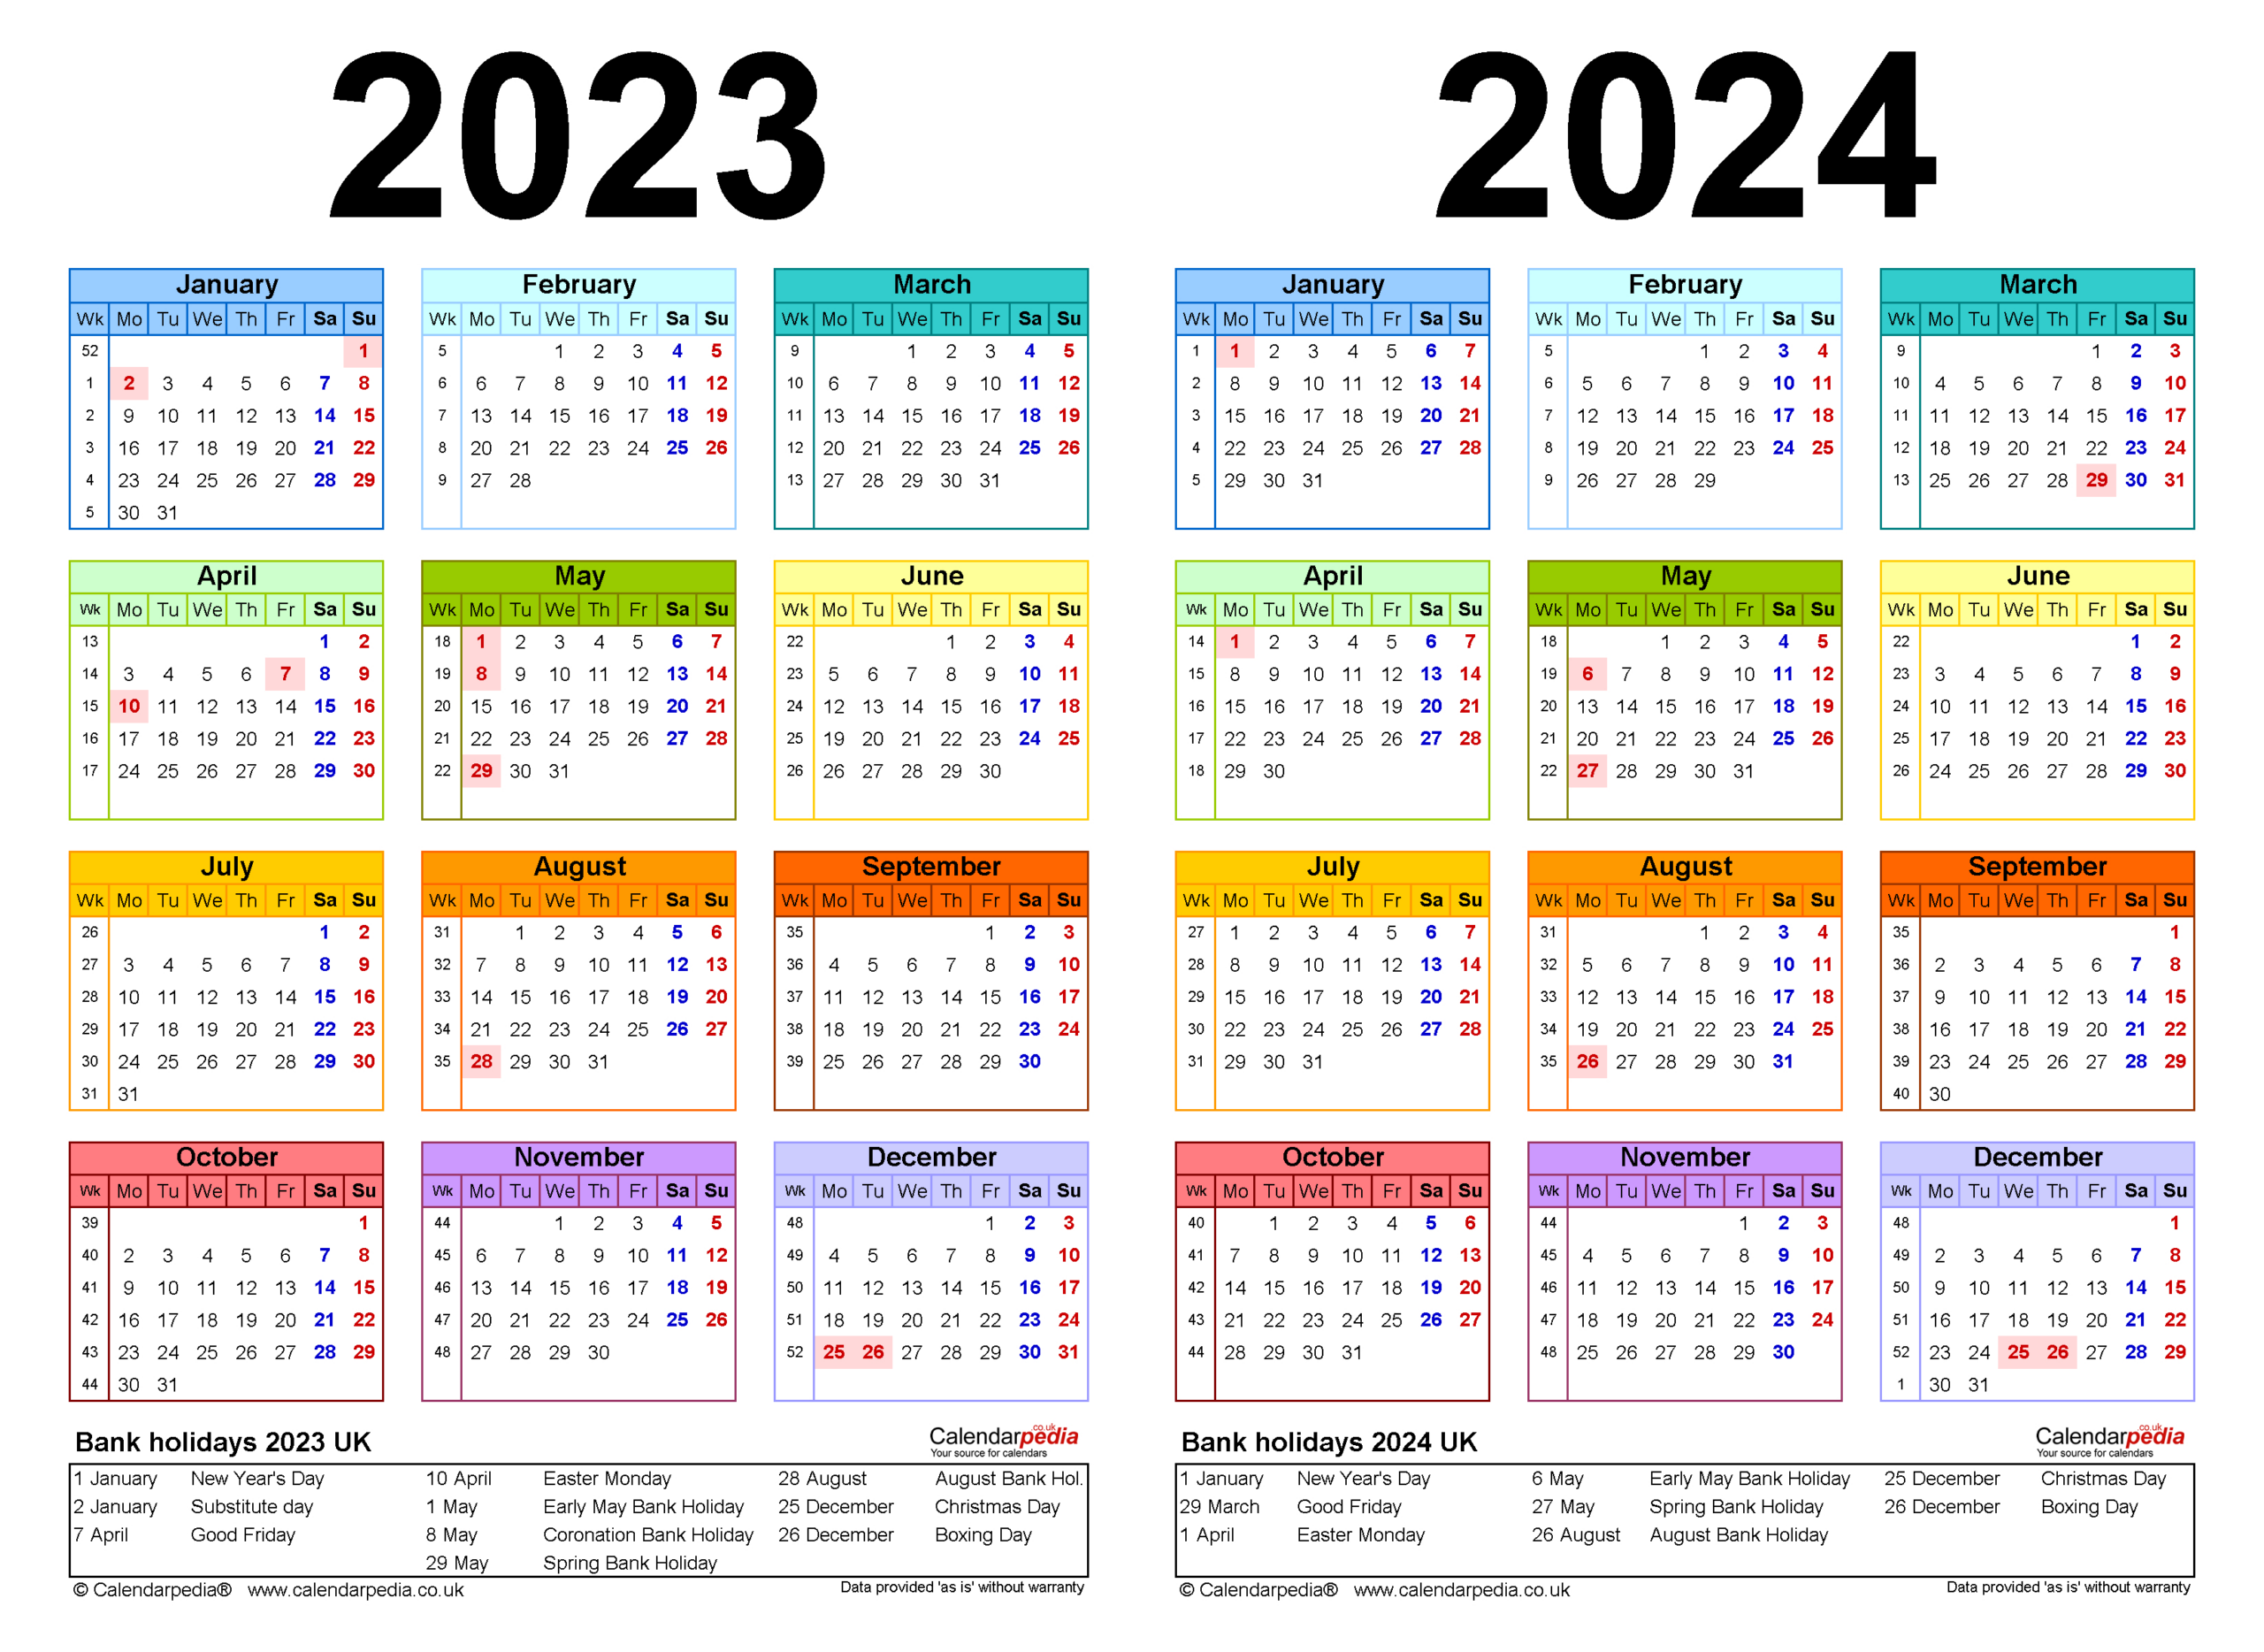 Two Year Calendars For 2023 &Amp;Amp;Amp; 2024 (Uk) For Pdf | Yearly Calendar 2023 And 2024